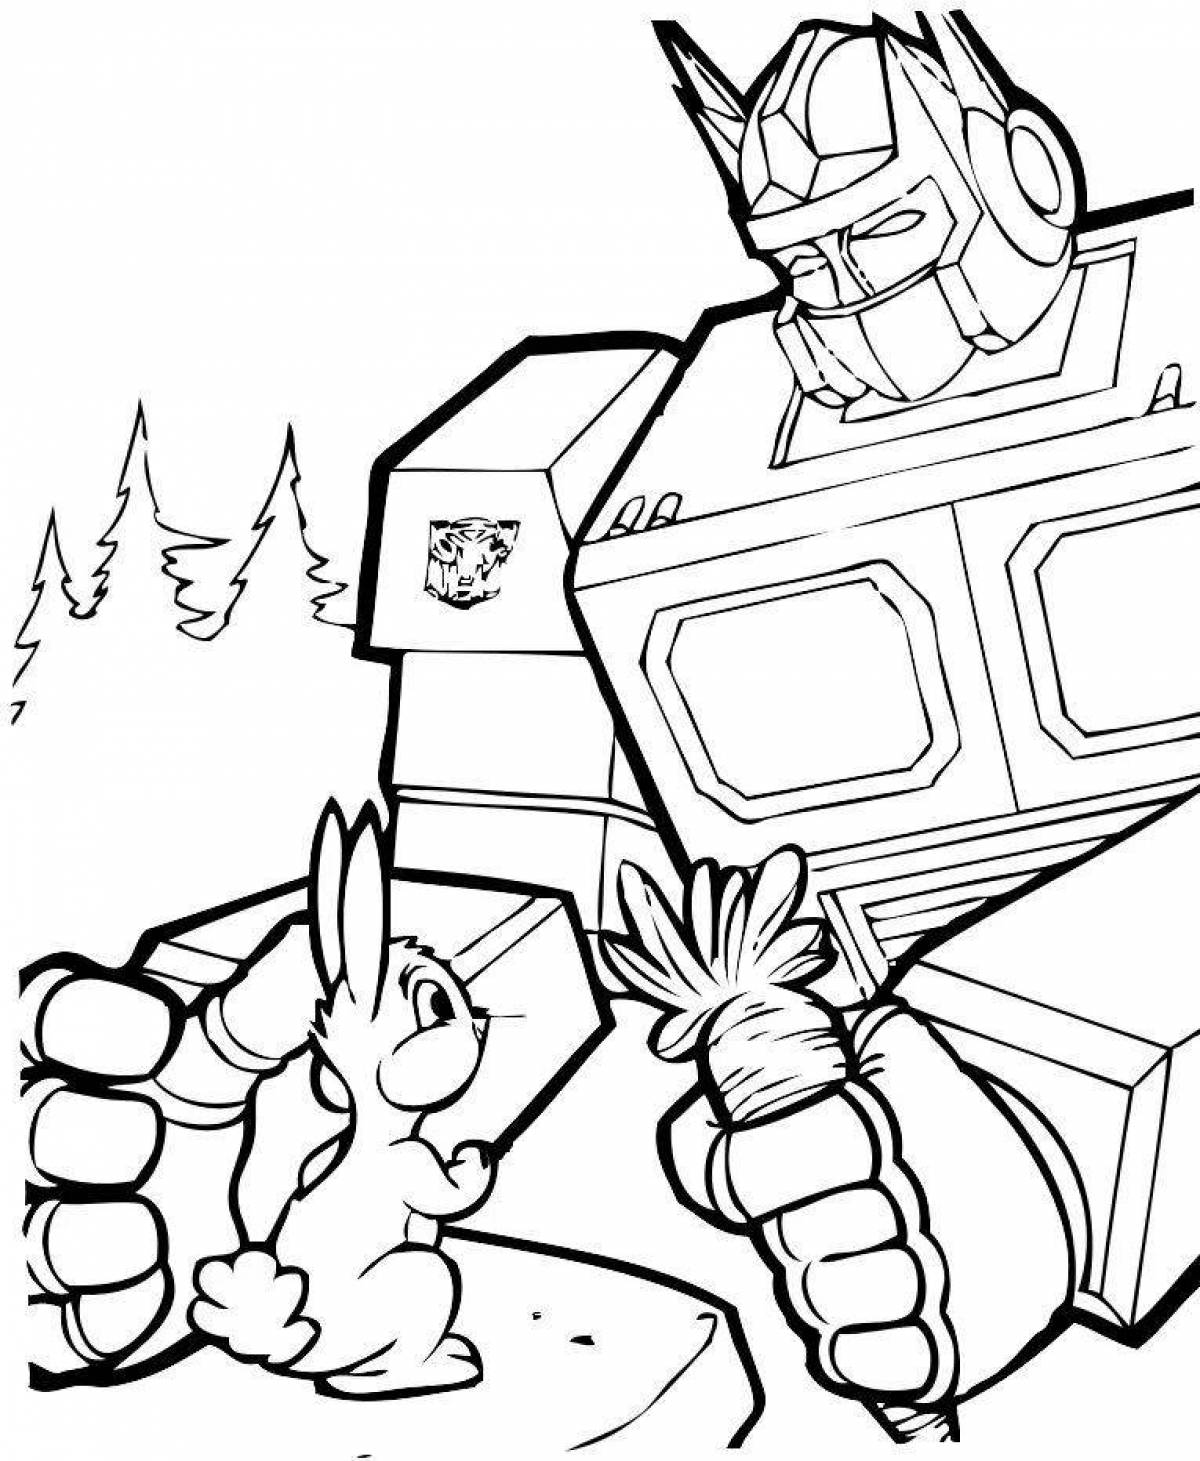 Incredible fire robot coloring page